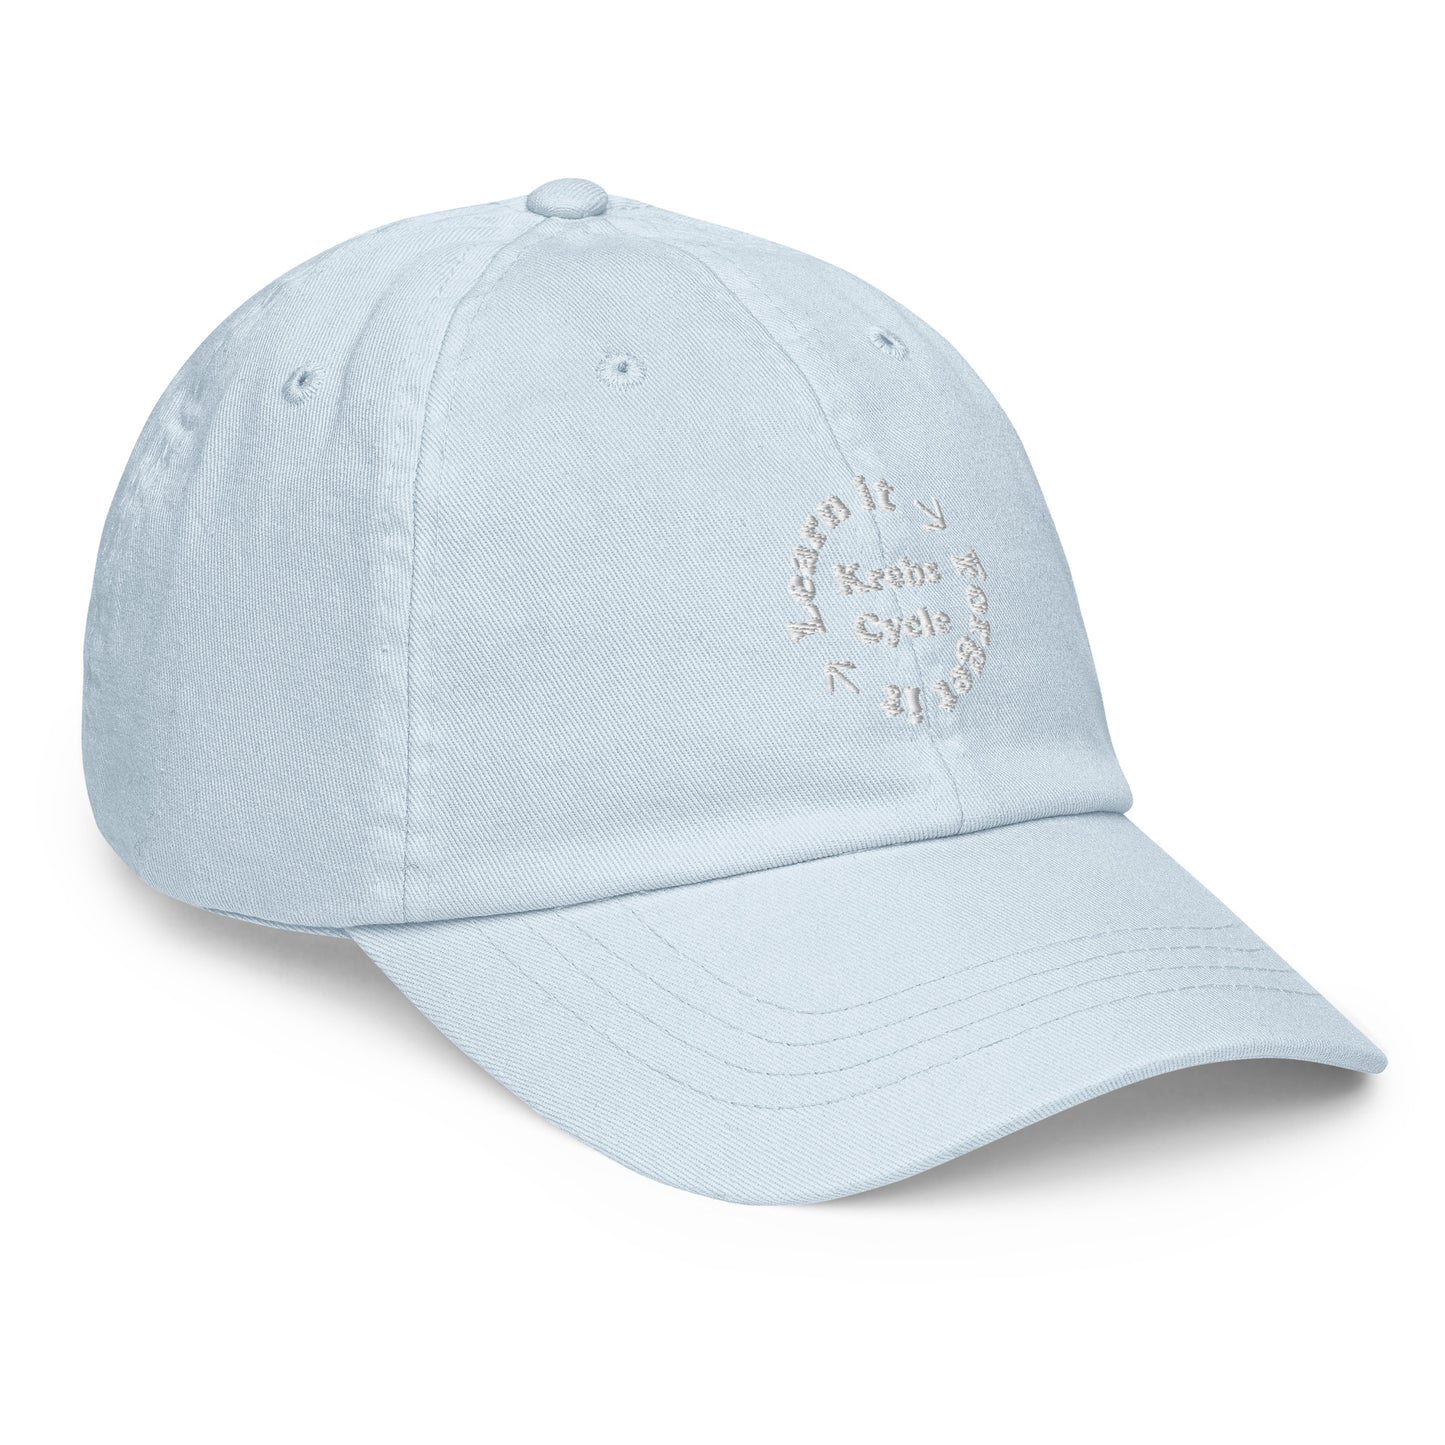 Krebs Cycle Embroidered Pastel Hat